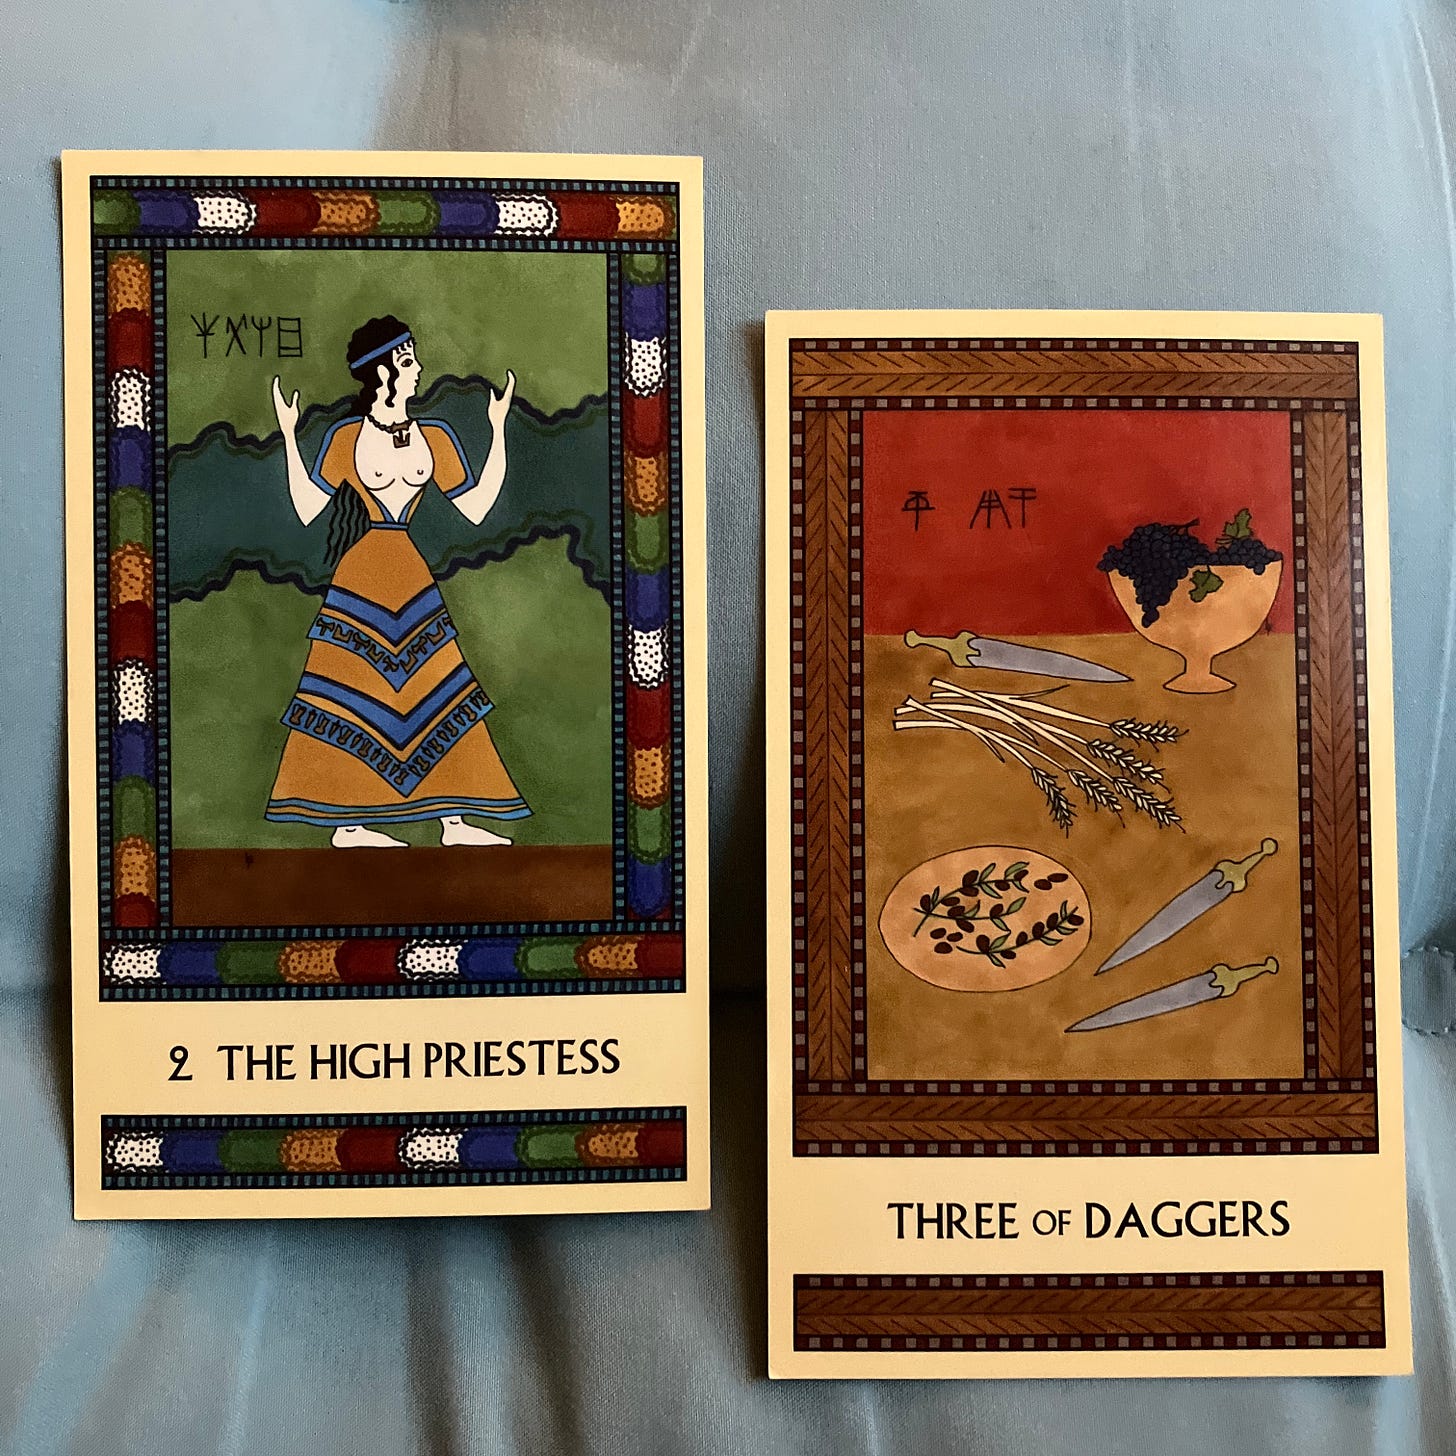 Two Minoan Tarot cards side by side. The High Priestess shows a white-skinned woman with long black hair, wearing a Minoan-style top and skirt in shades of yellow and blue. She faces right with her arms raised in a sacred gesture. The Three of Daggers shows a table laden with a platter of olives, a pile of grain stalks, a footed bowl full of grapes, and three gold-hilted daggers. 